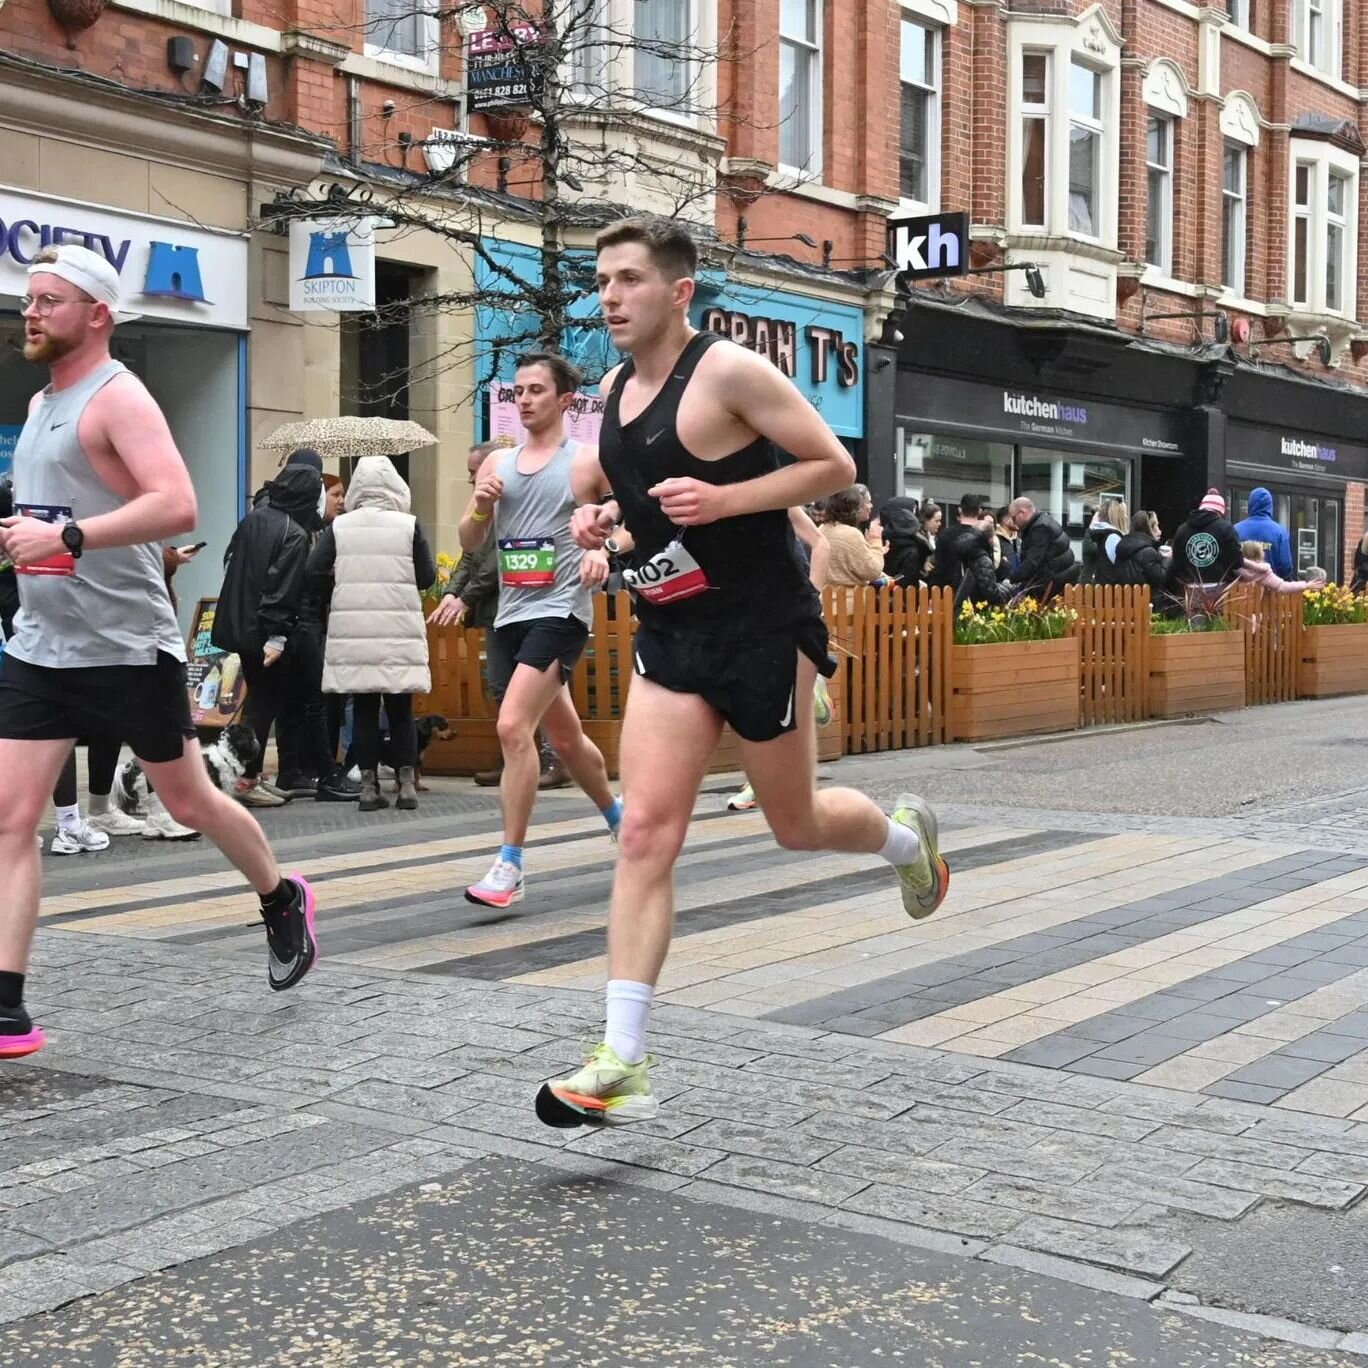 Extra special props to @ryan_murphy_94 SUB 3 MARATHON at Manchester on Sunday with a 2:58 💥 

Last year we travelled to Copenhagen and Ryan's efforts were thwarted by a collision with another runner in the final few kilometres. 
It's a hard slog, tr